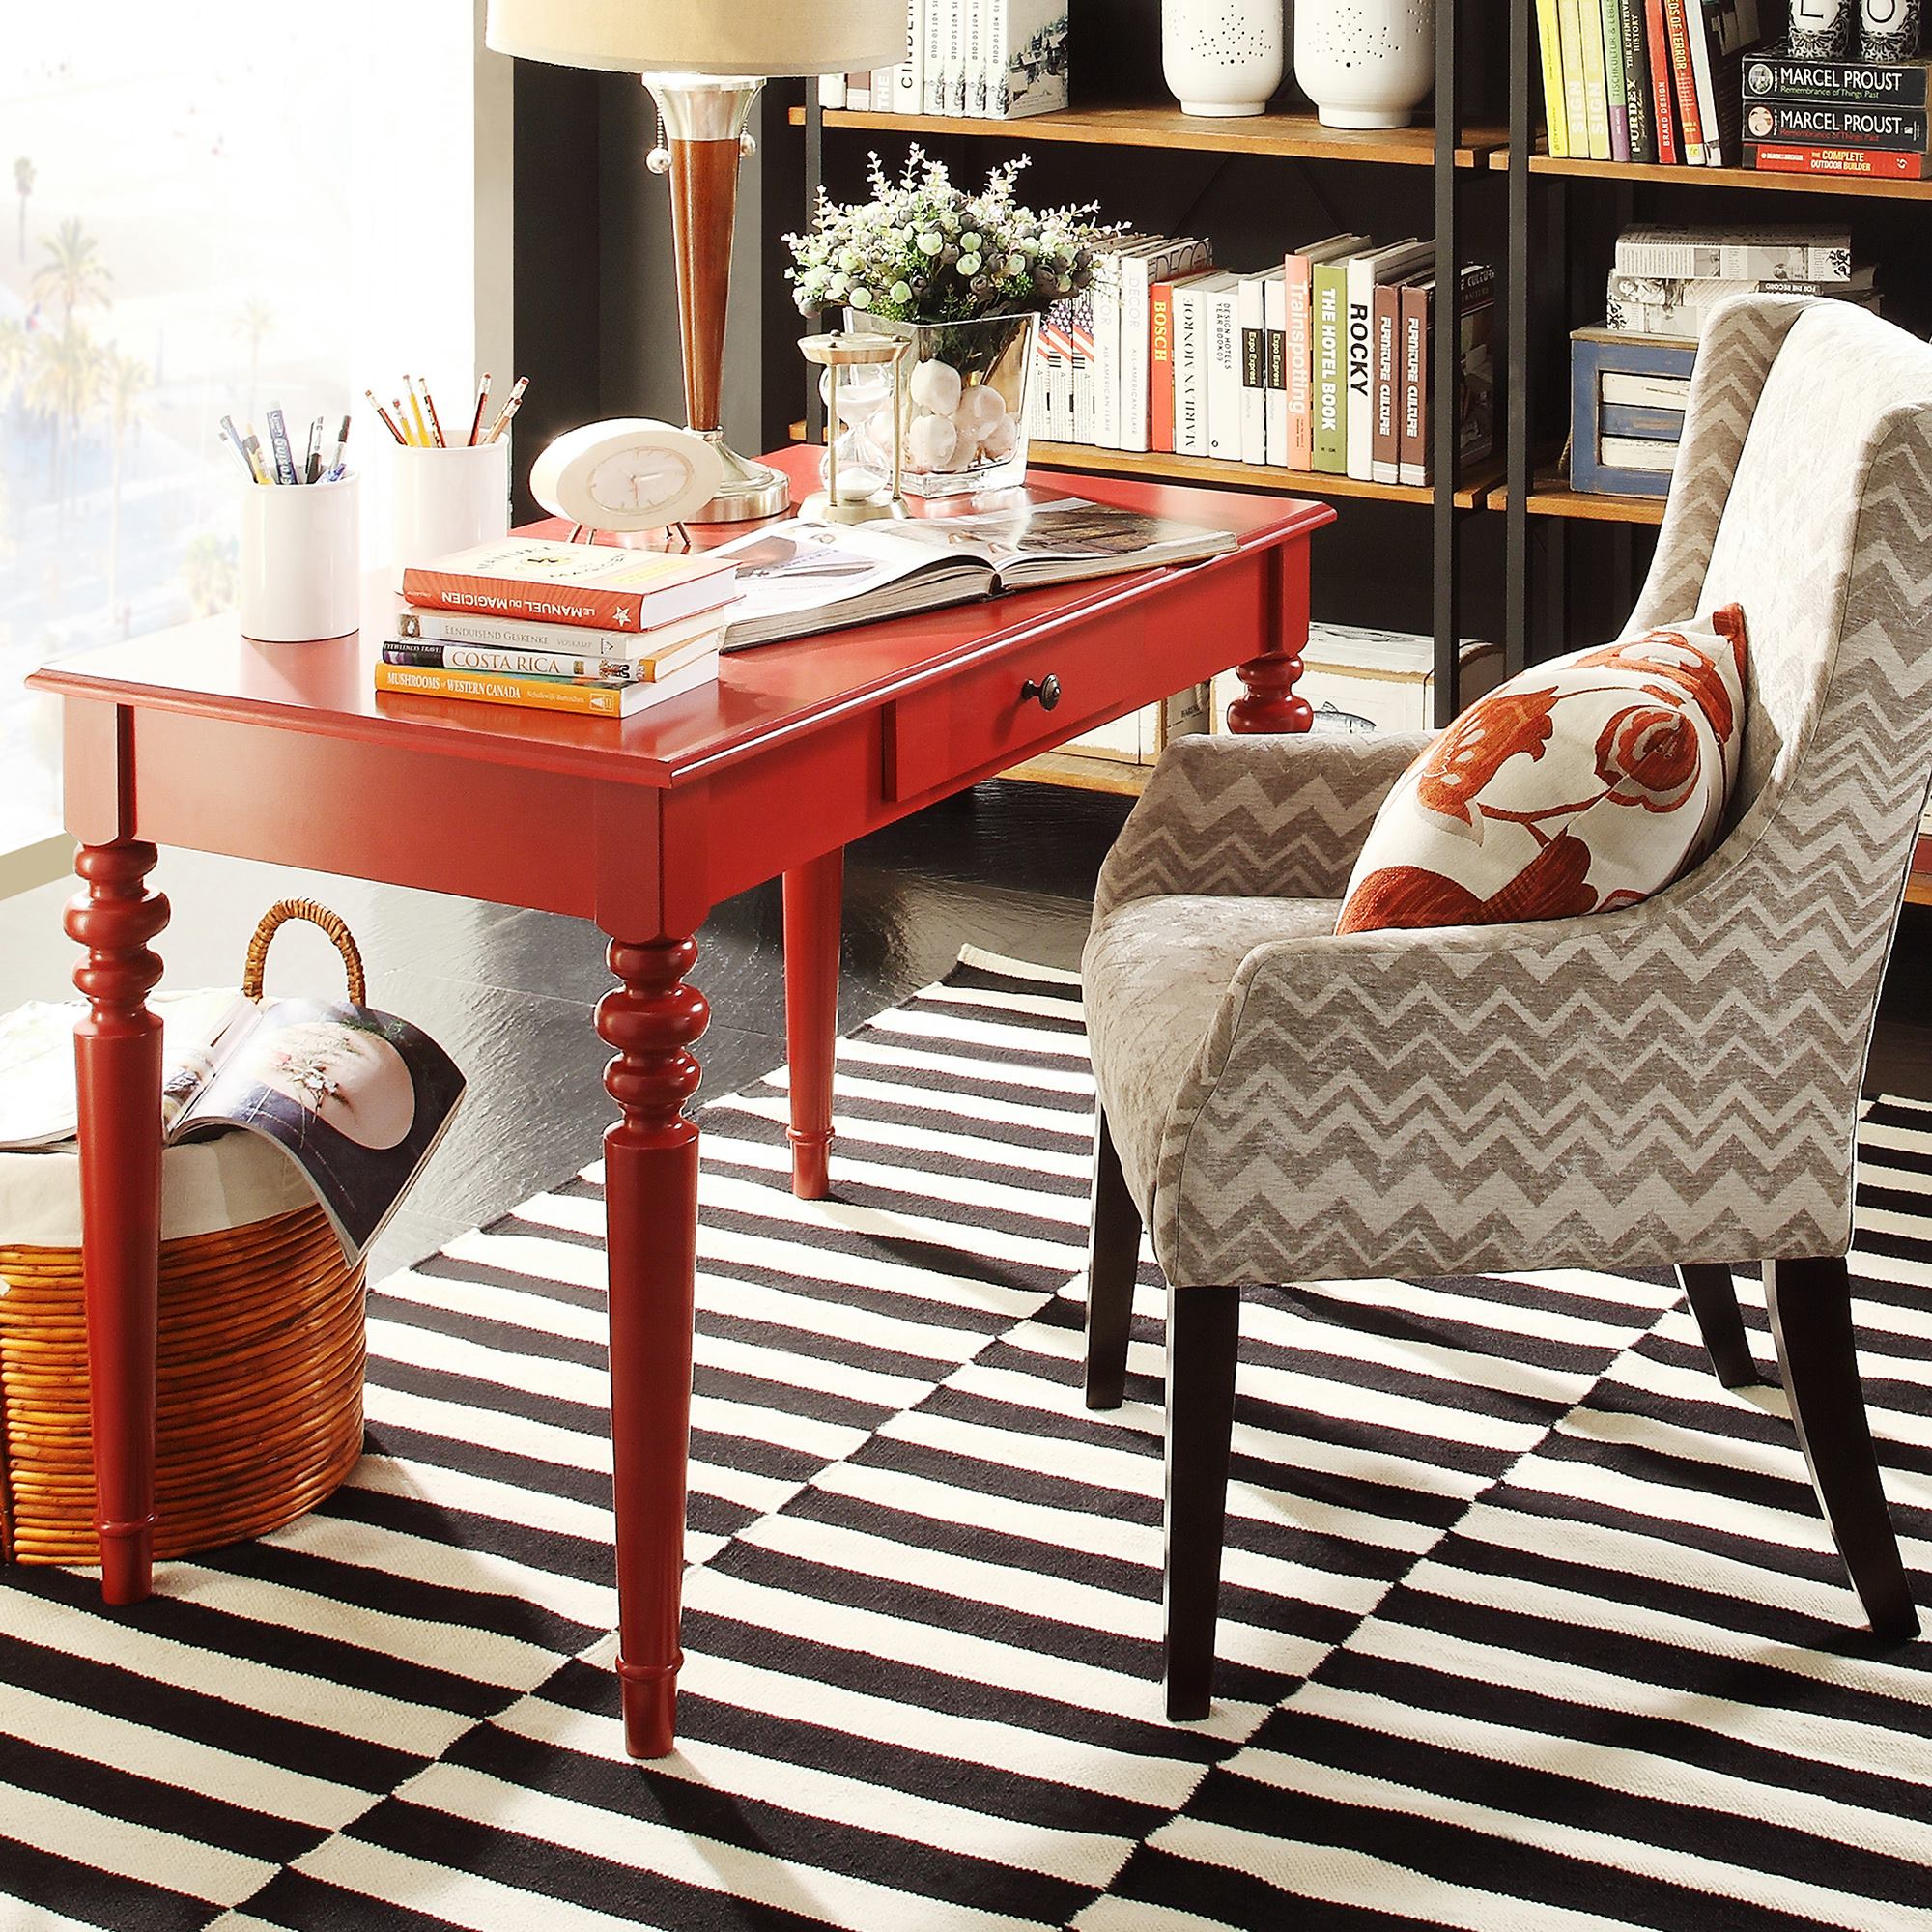 Home décor trends are all about having fun, and this image depicts a mixture of patterns. There is a black and white striped rug, a grey chevron printed hostess chair, and a bright red desk. The chair also has a red floral-printed accent pillow on it.